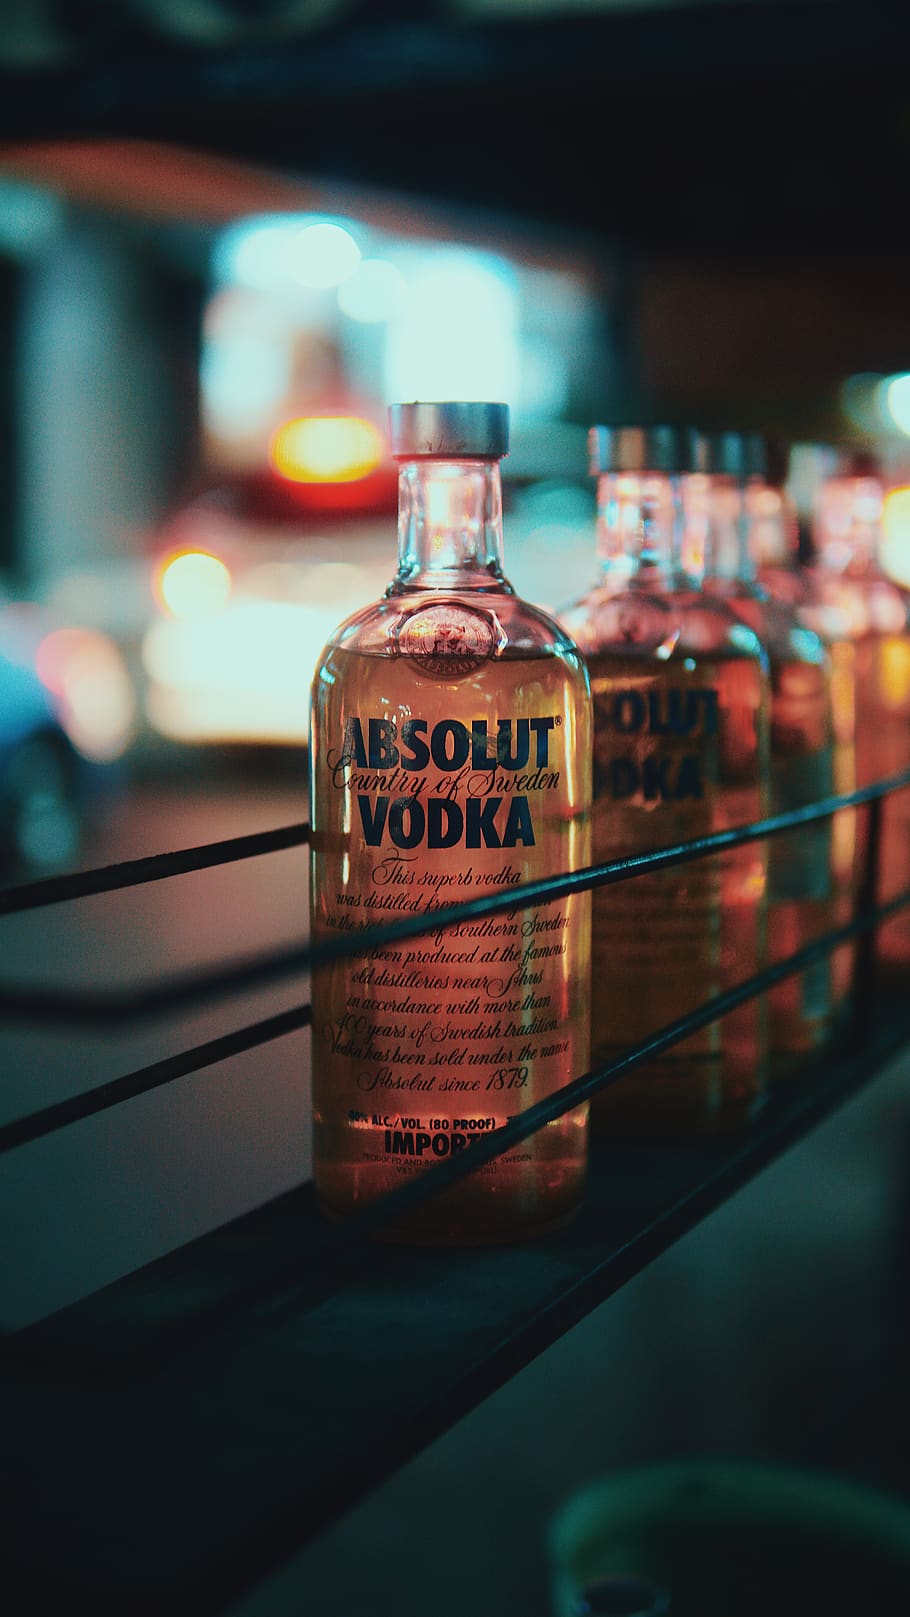 Absolut Vodka bottle lot, container, glass - material, indoors, HD wallpaper